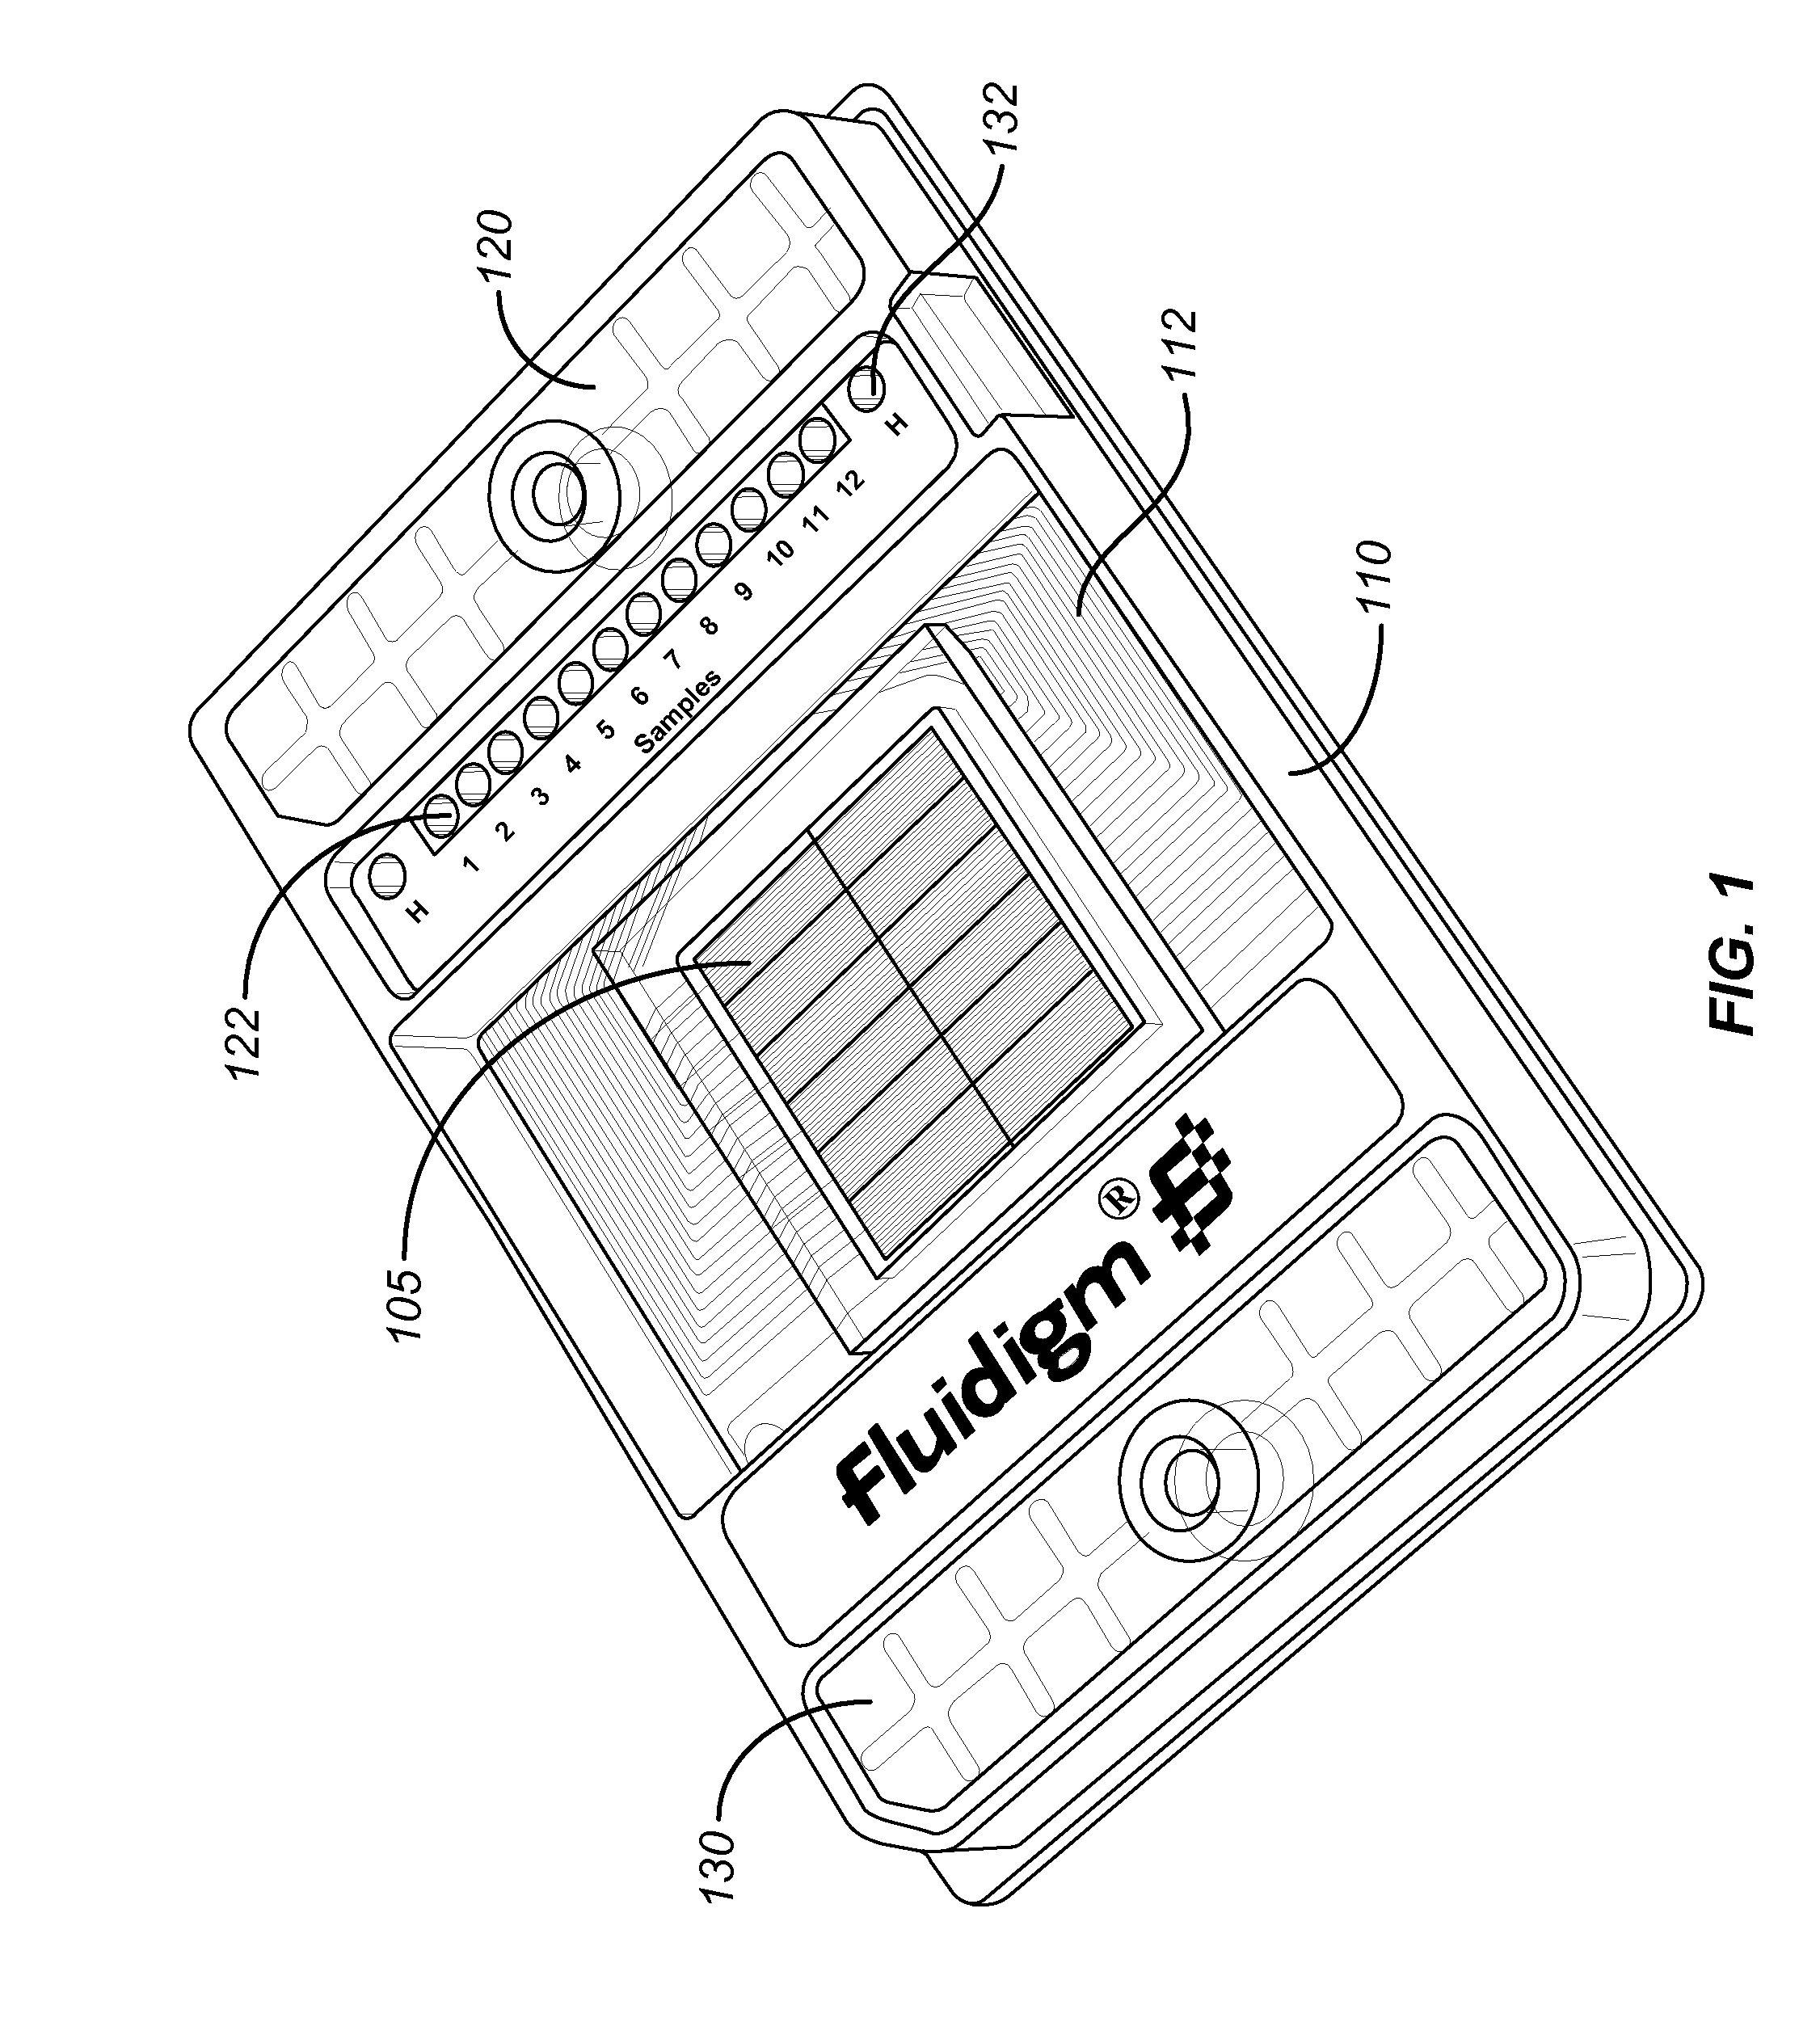 Method and apparatus for determining copy number variation using digital PCR